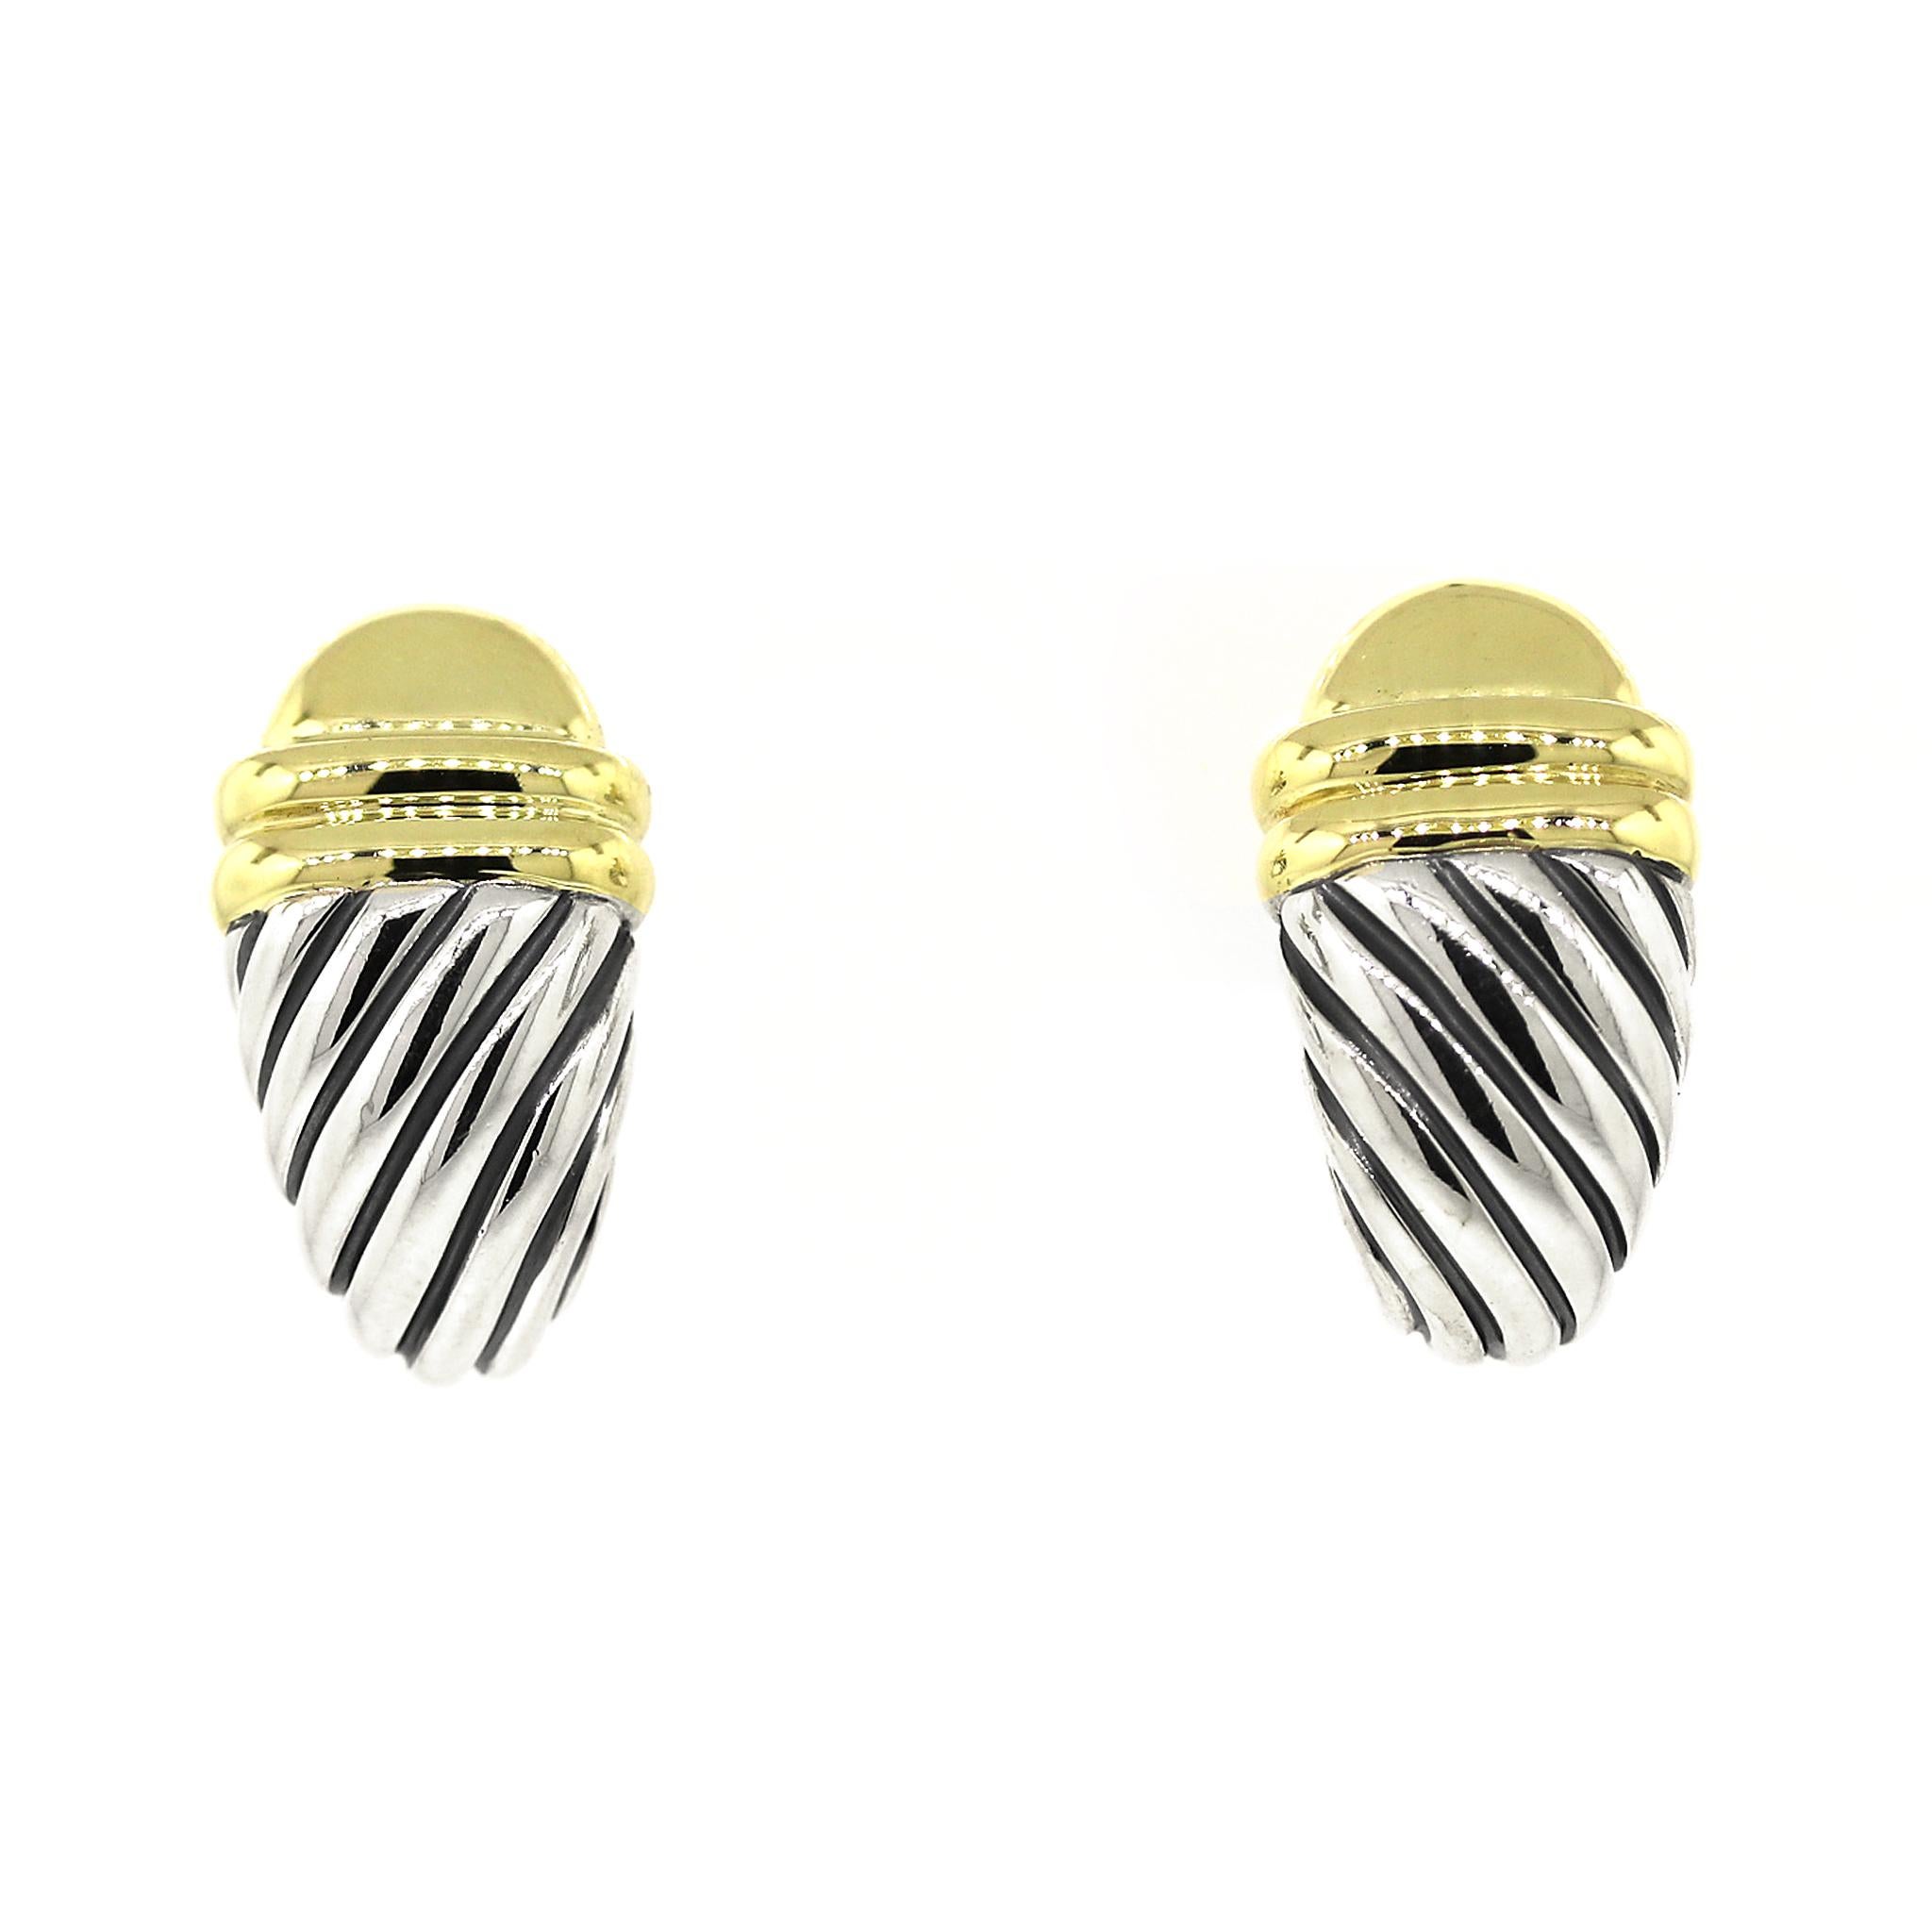 David Yurman Cable Shrimp Earrings in Sterling Silver and 14k Yellow Gold